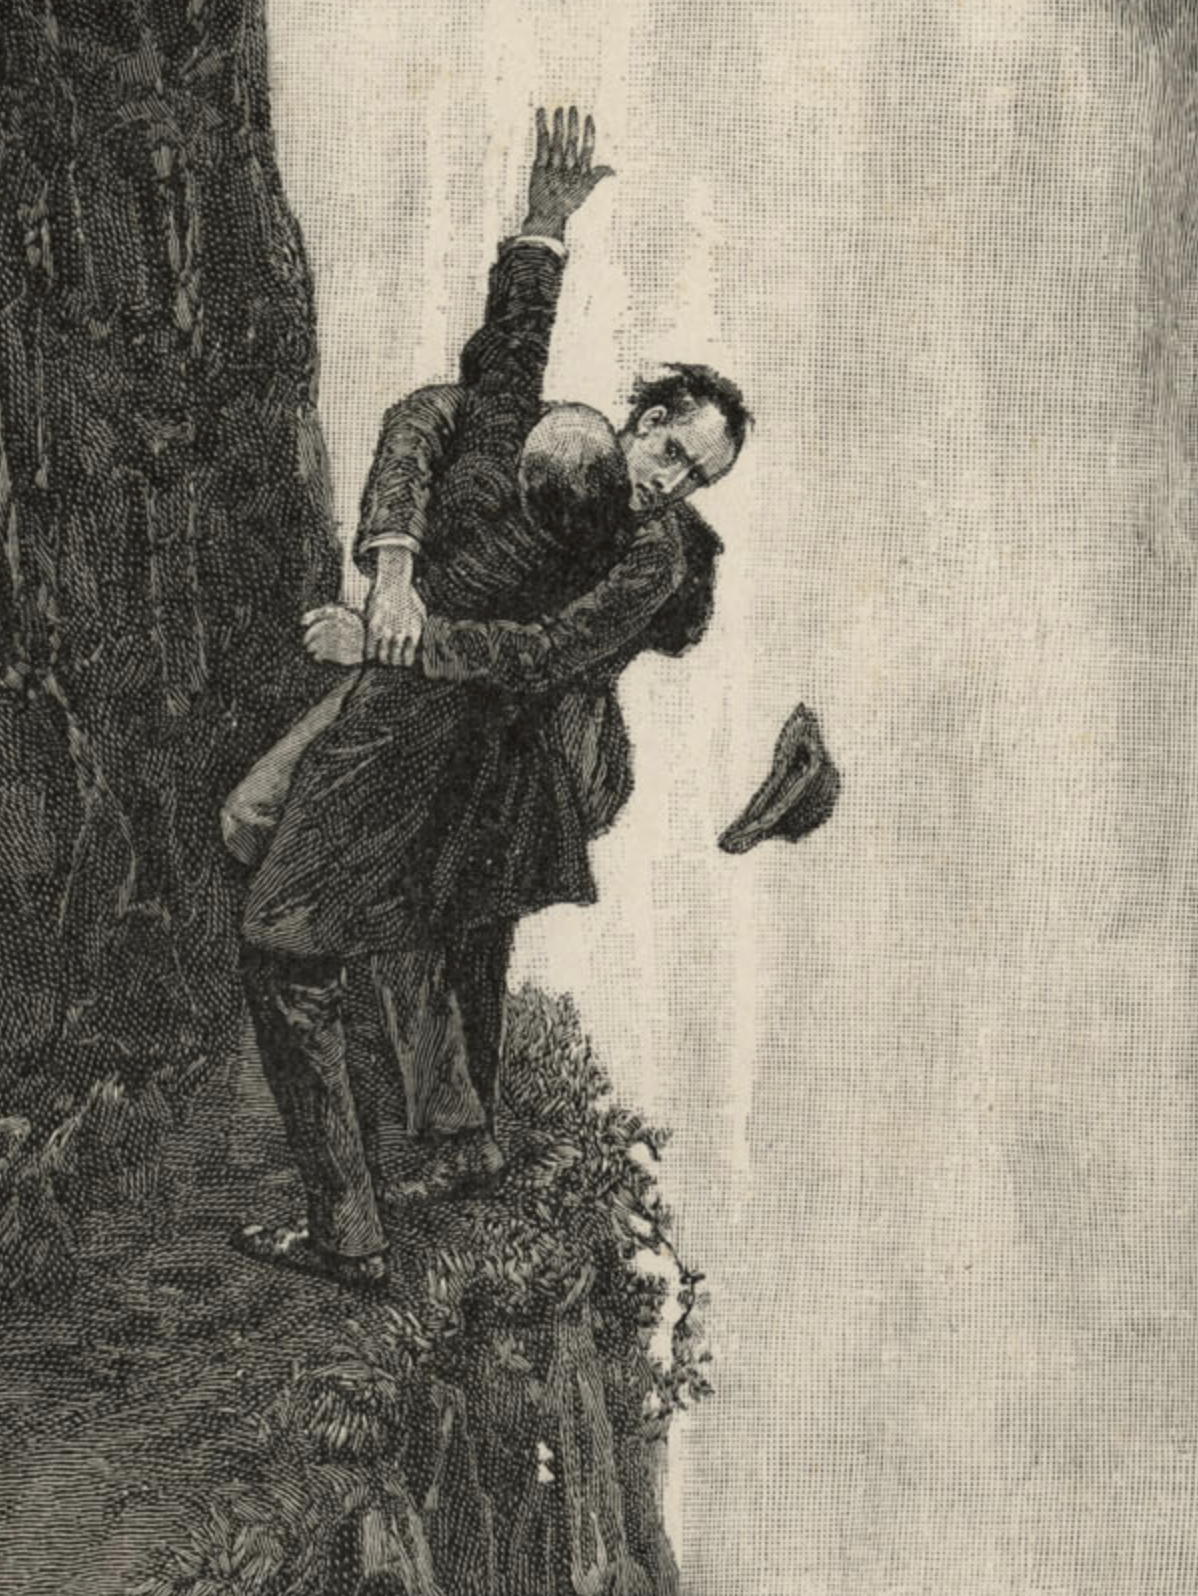 Sherlock Holmes fights Moriarty at the Reichenbach Falls